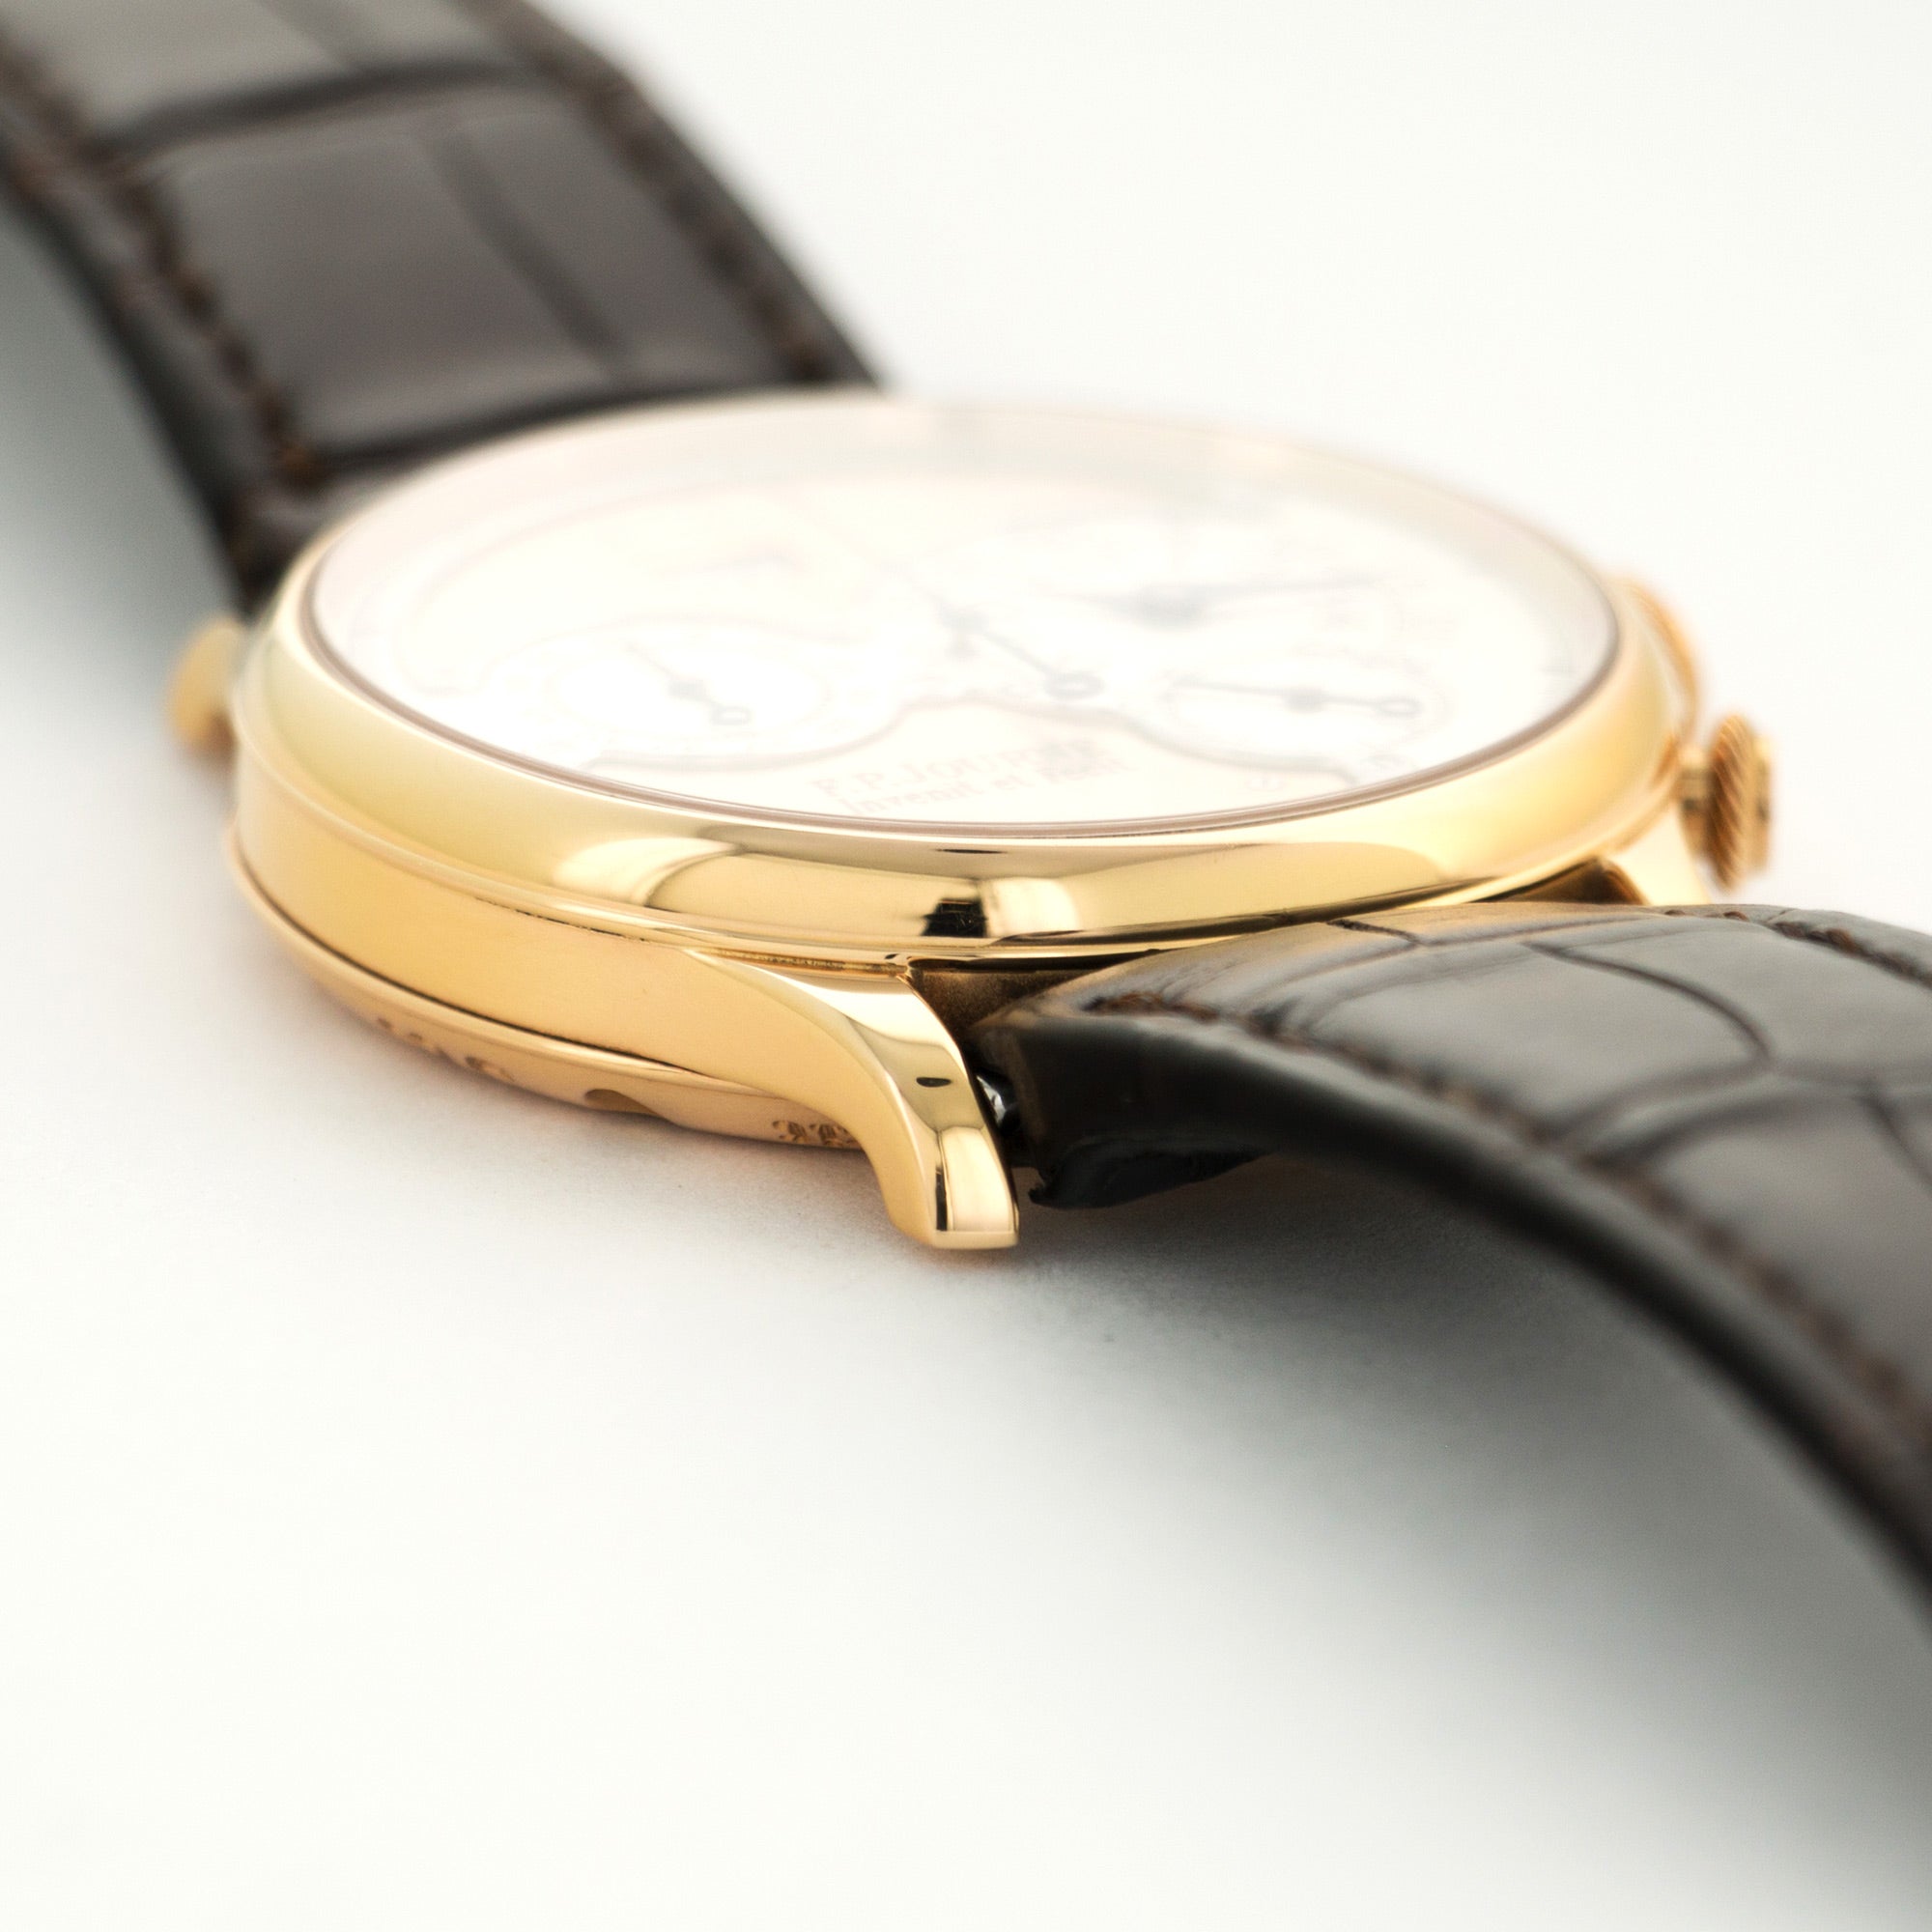 FP Journe - F.P. Journe Rose Gold Octa Chronograph Watch - The Keystone Watches